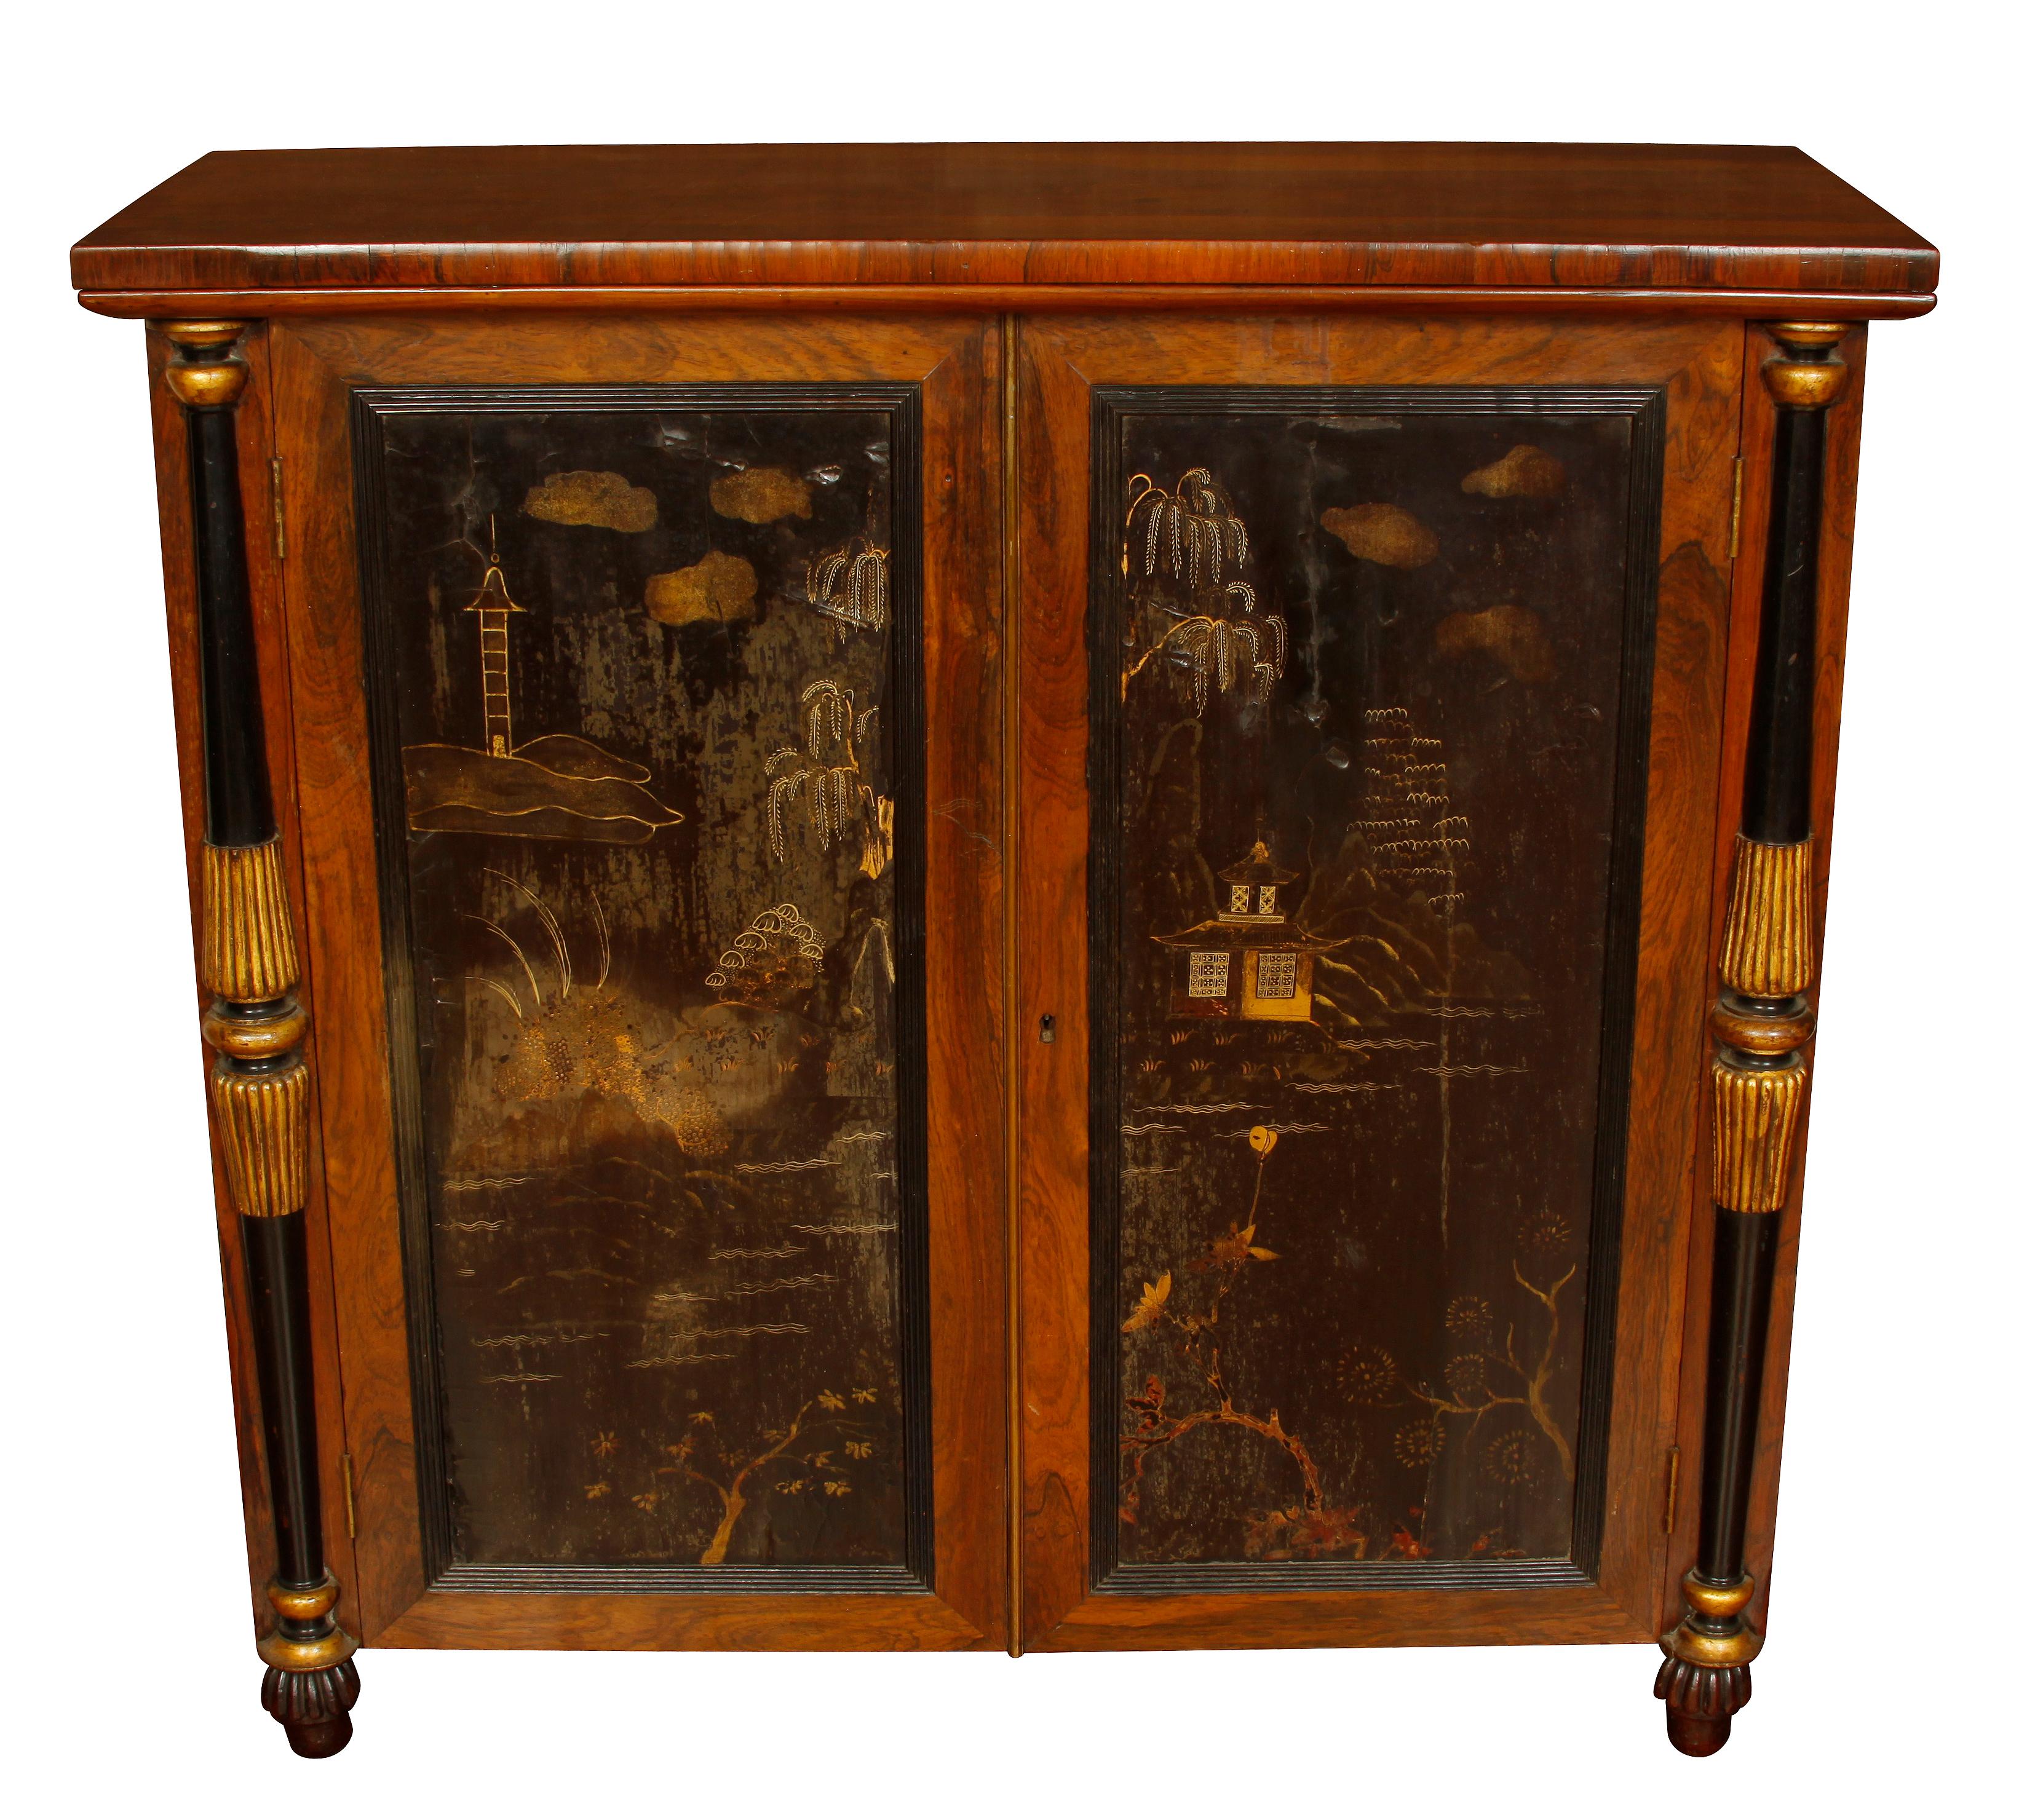 Pair of William IV chinoiserie side cabinets with japanned lacquer panel doors and reeded feet, 19th century.